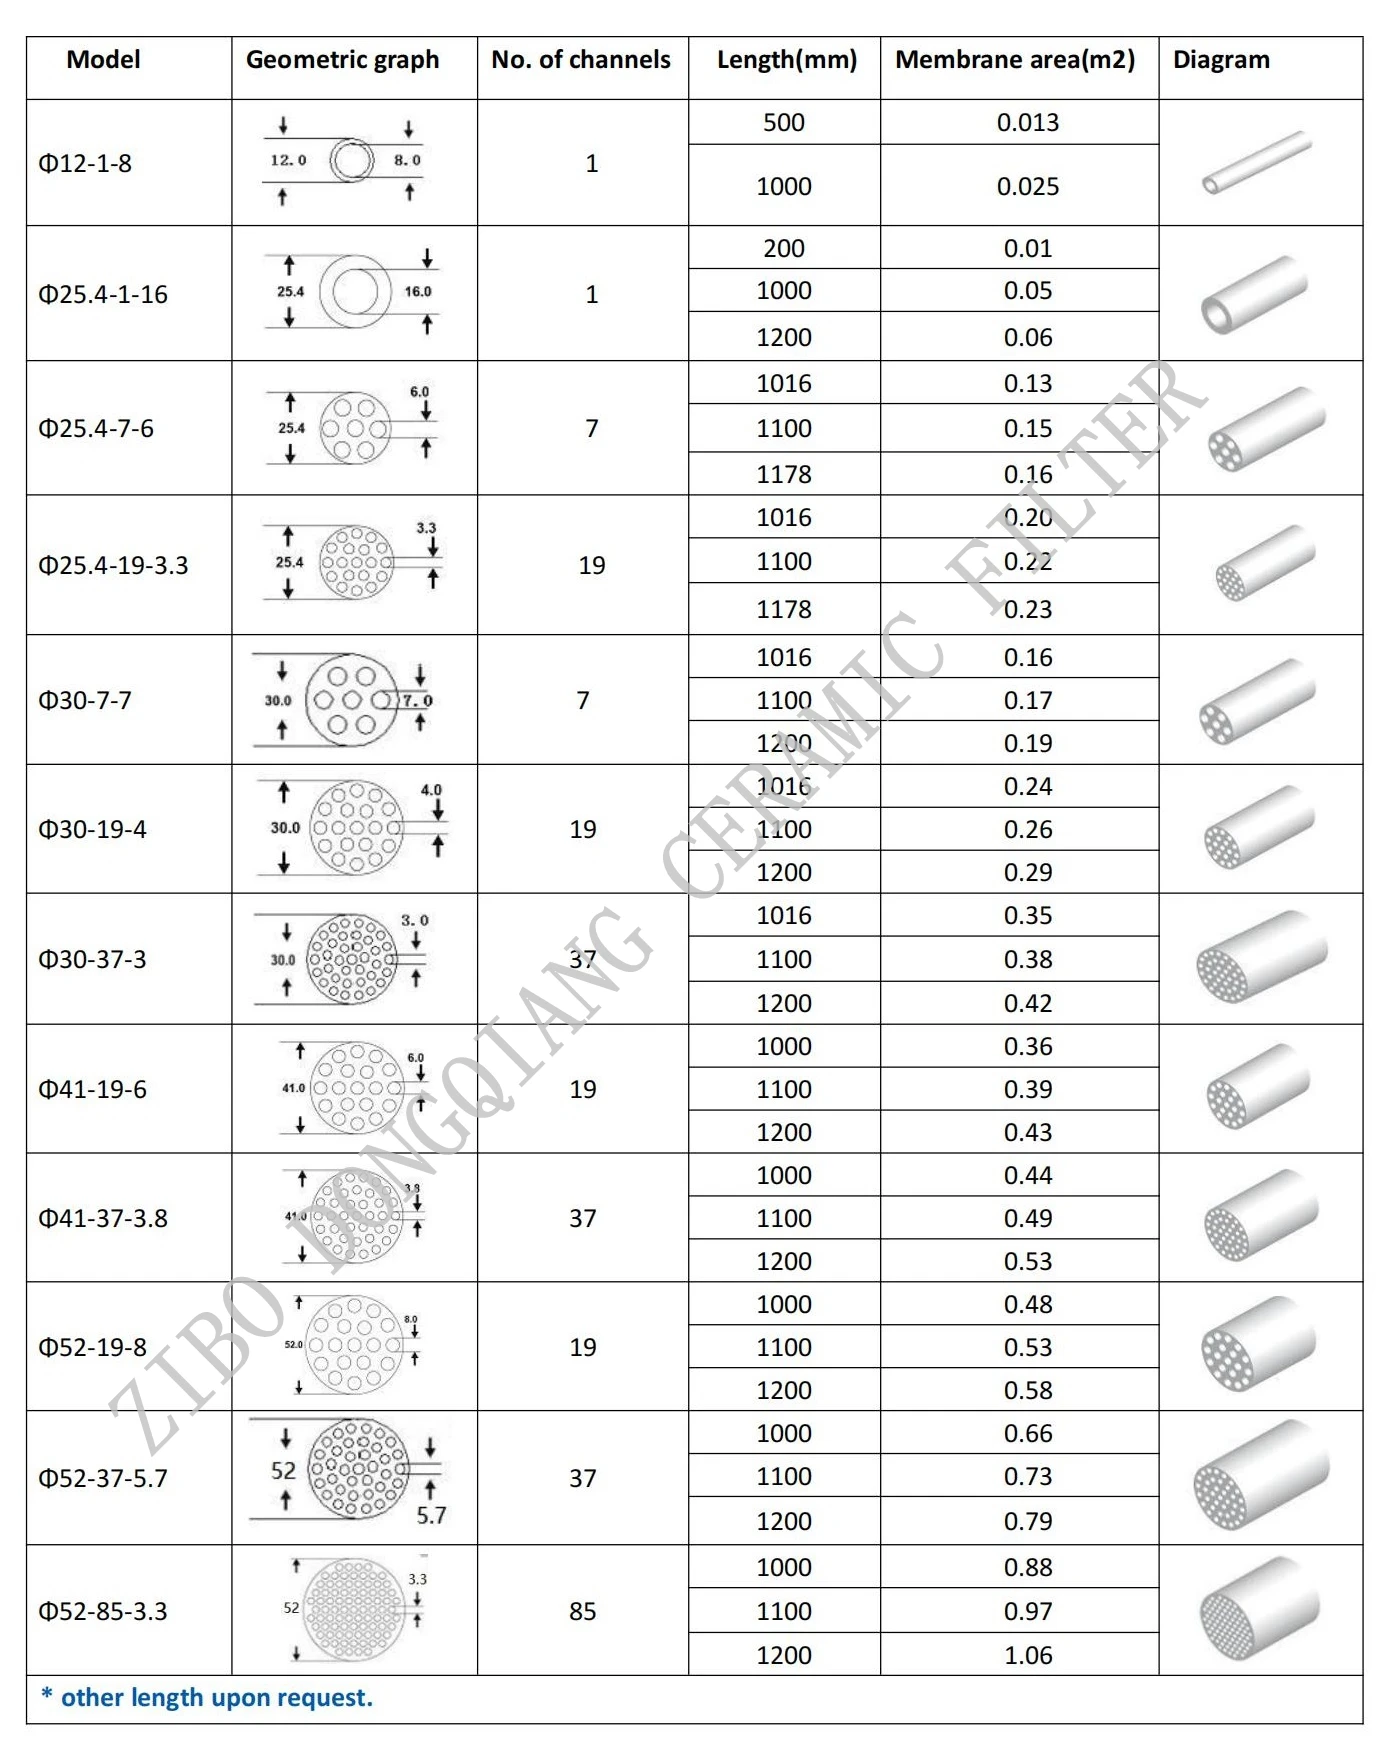 ZBDQ specification